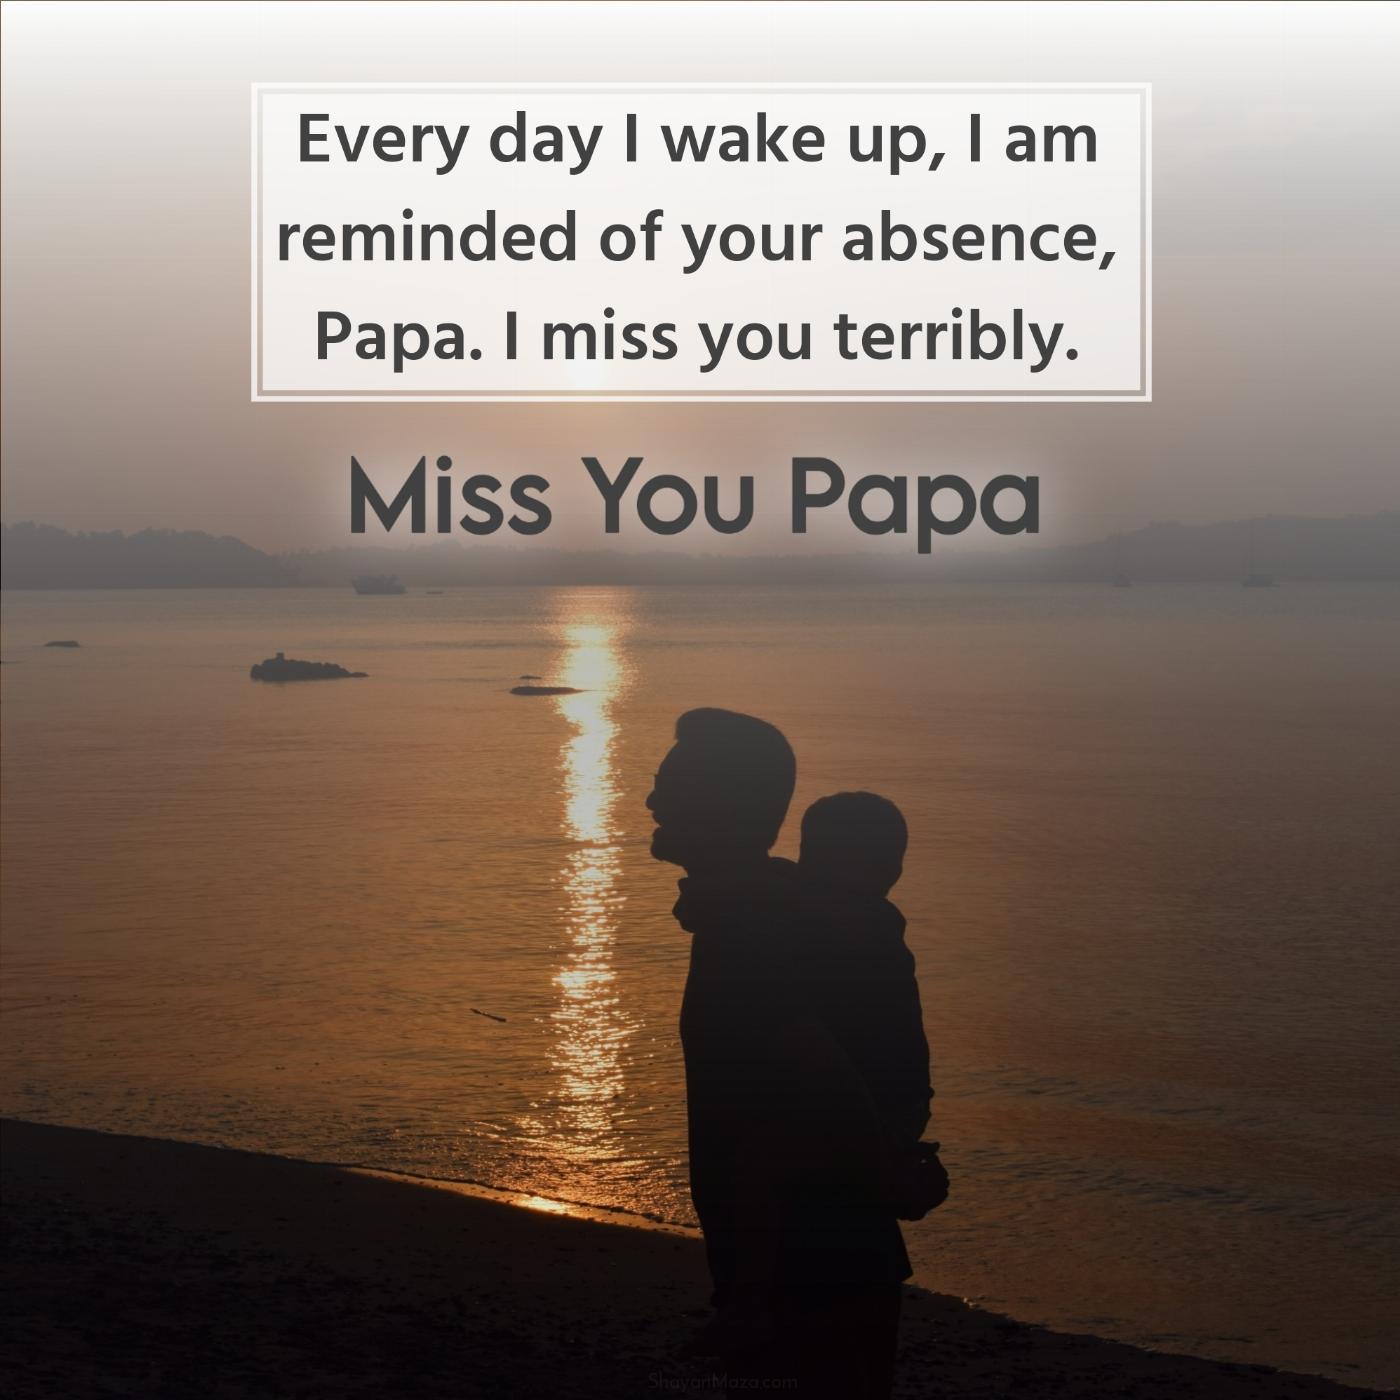 Every day I wake up I am reminded of your absence Papa